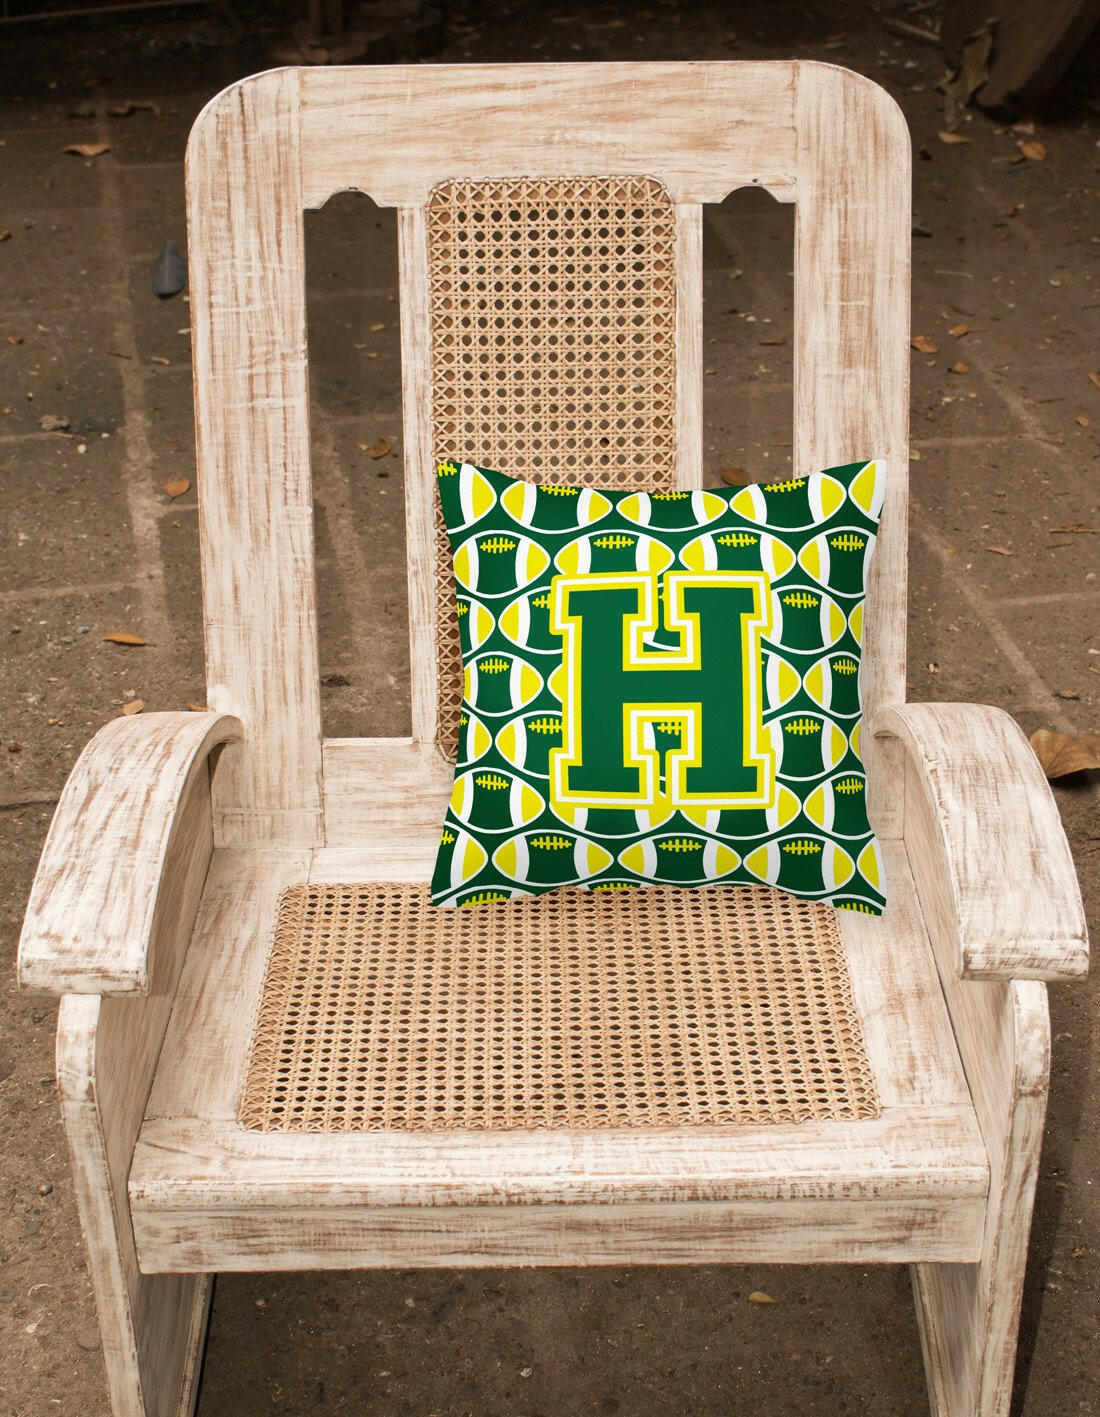 Letter H Football Green and Yellow Fabric Decorative Pillow CJ1075-HPW1414 by Caroline's Treasures